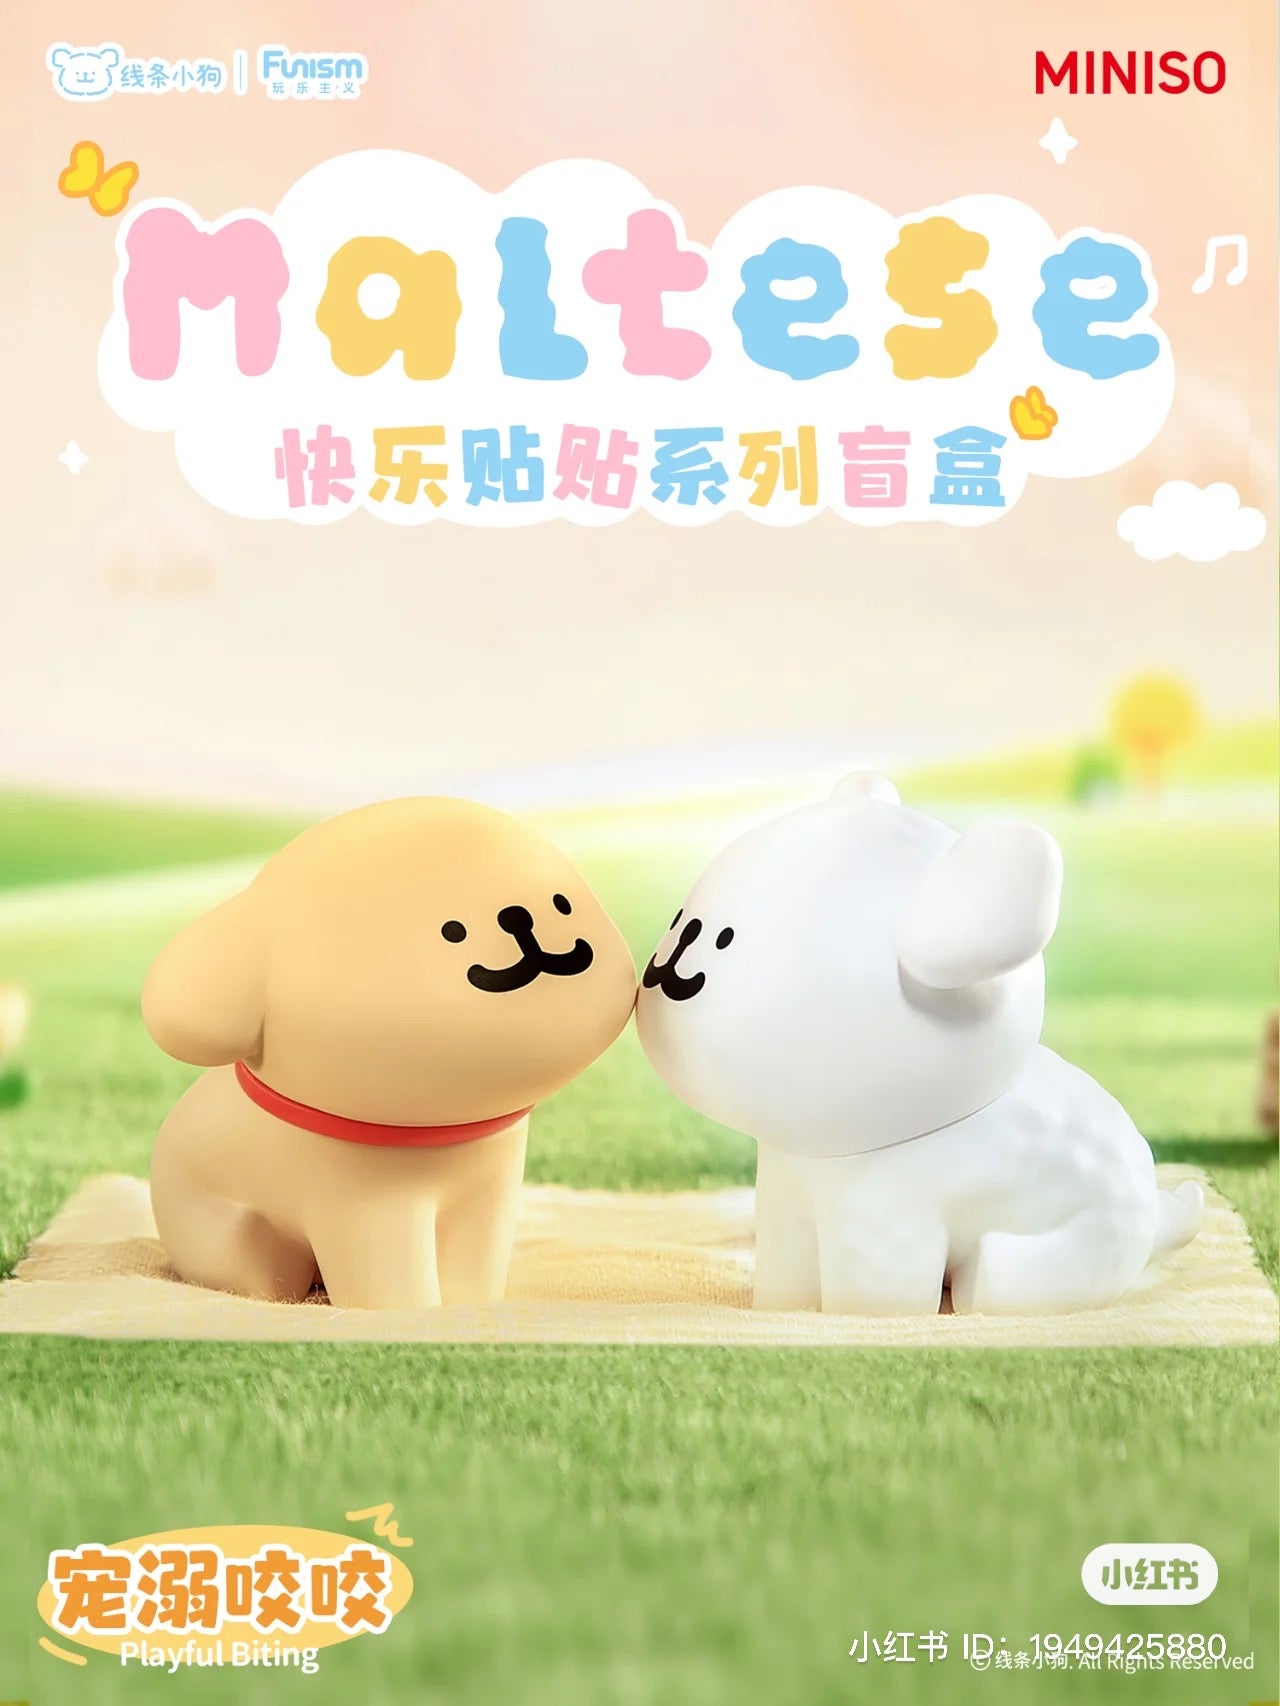 A blind box series featuring Maltese Happy Snuggling toy animals. Includes 6 regular designs and 1 secret variant. Available at Strangecat Toys.